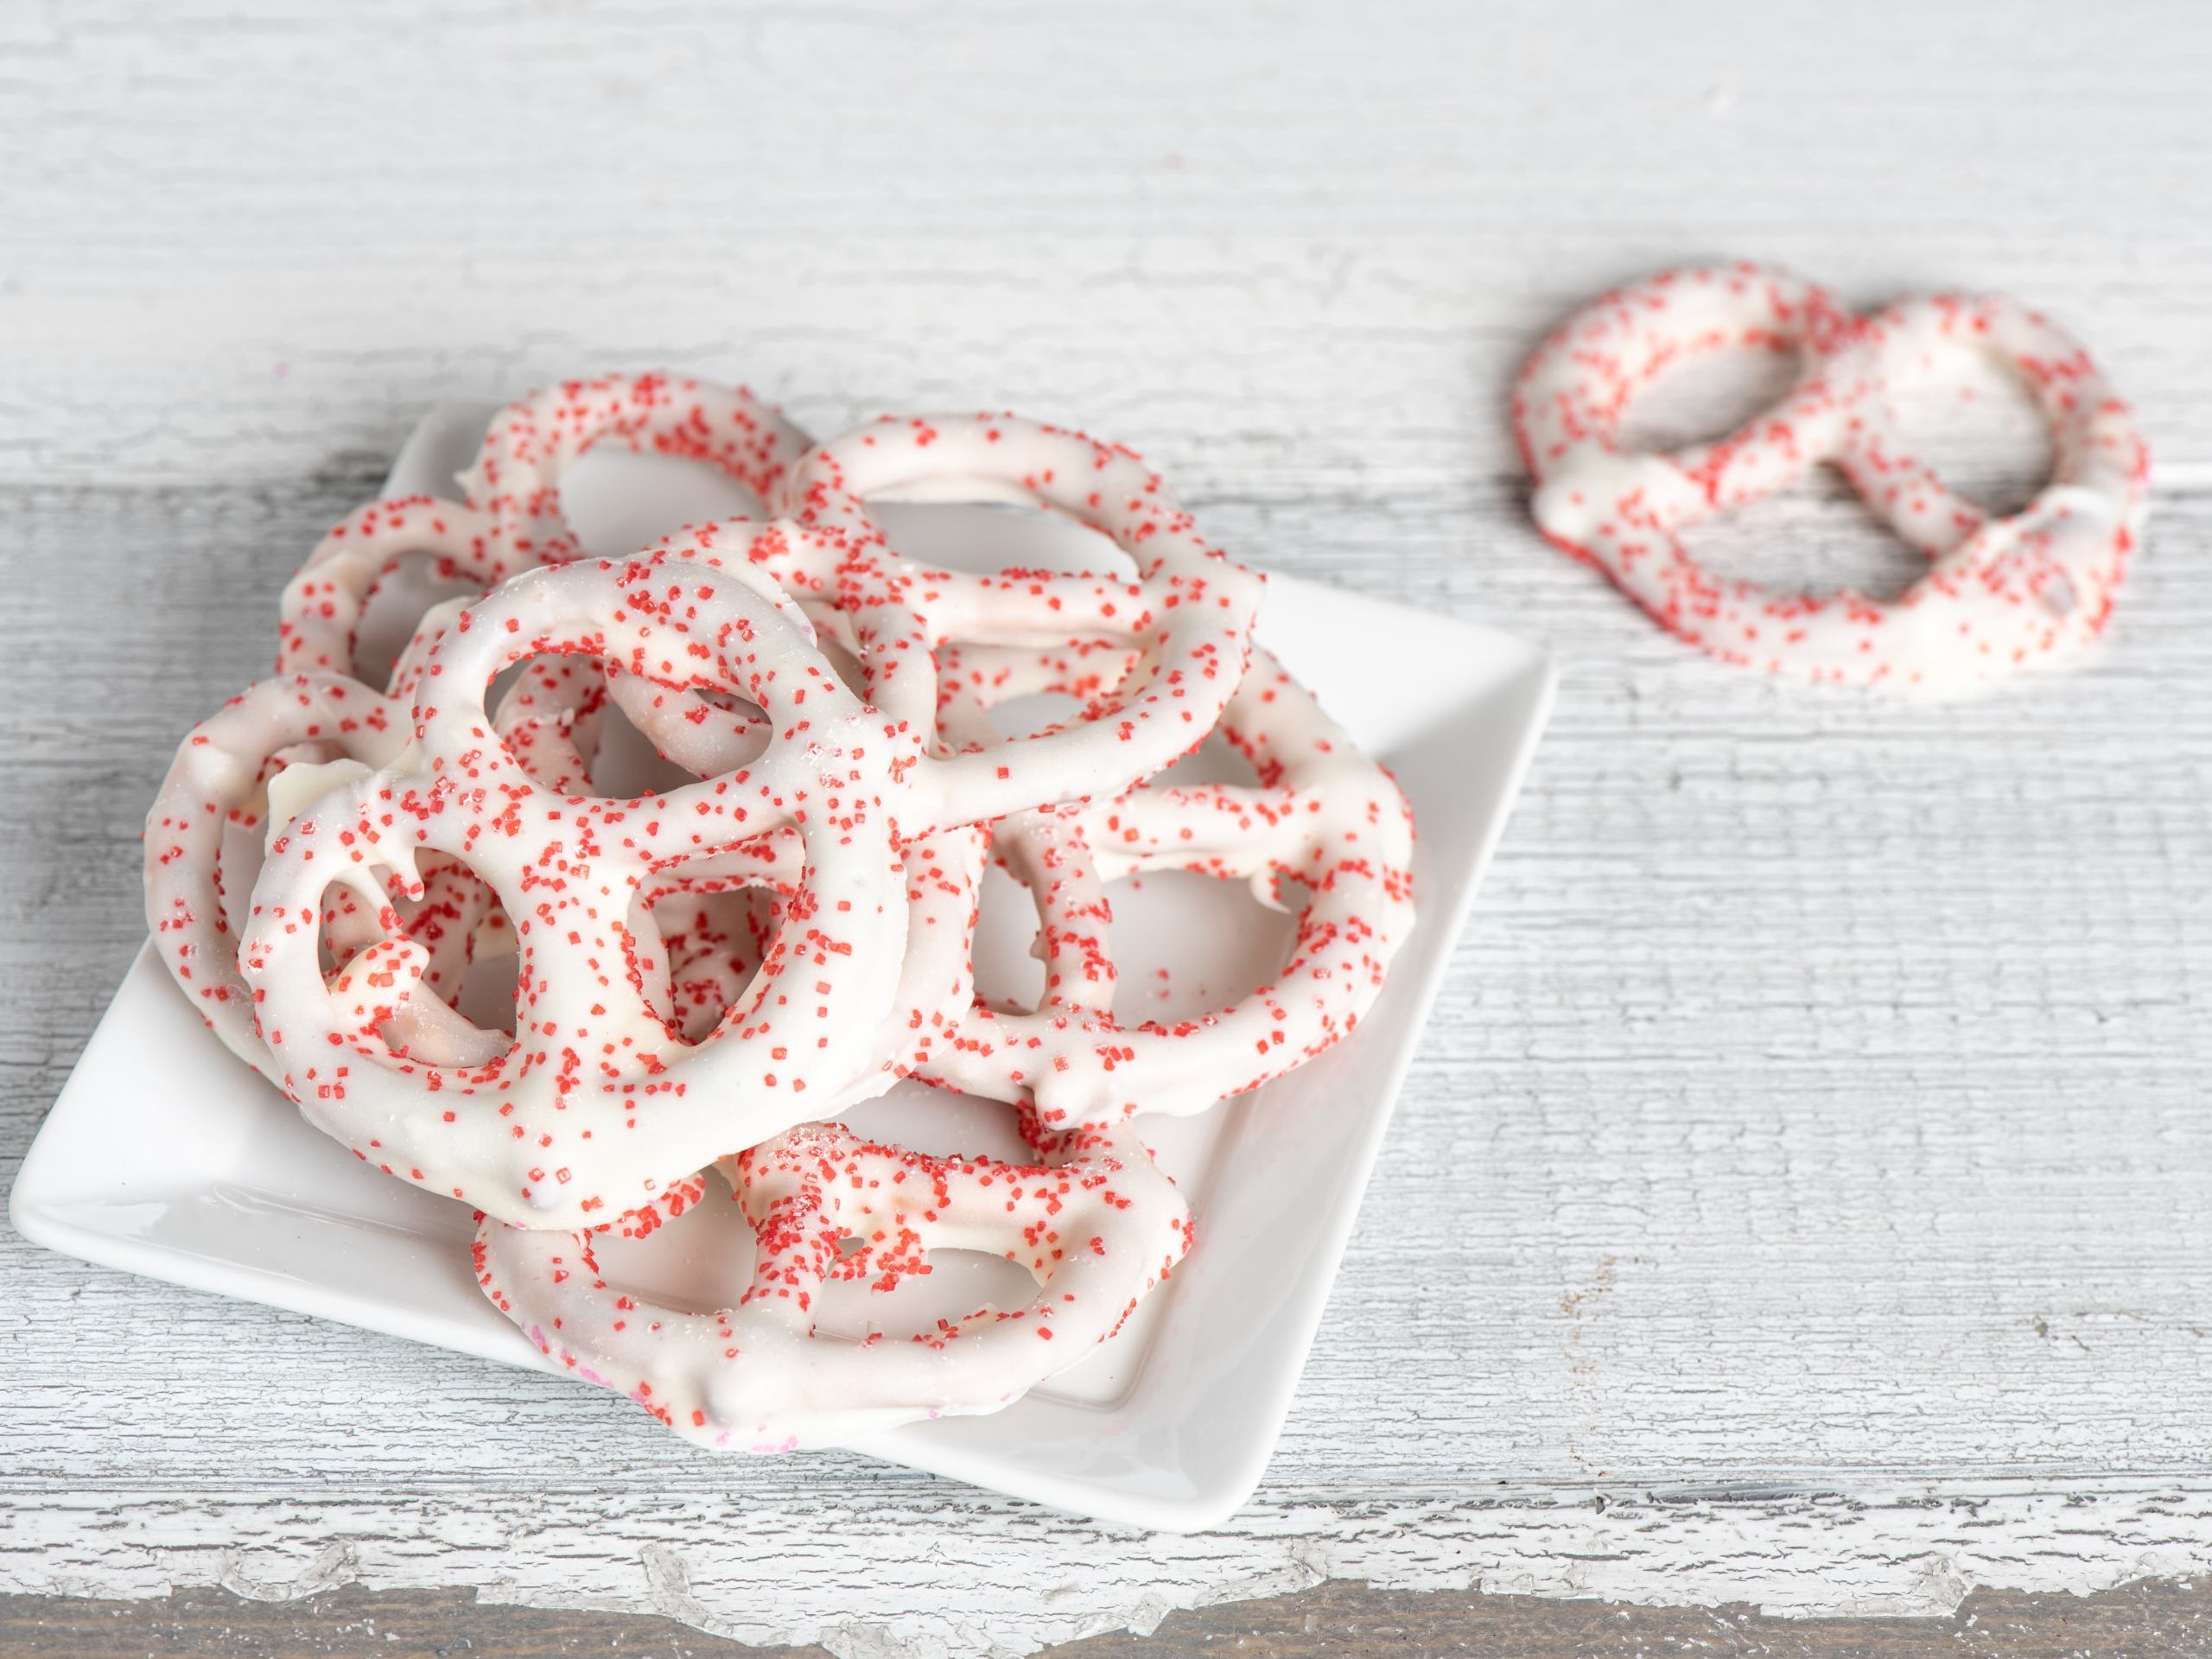 Try this yogurt covered pretzels recipe today!